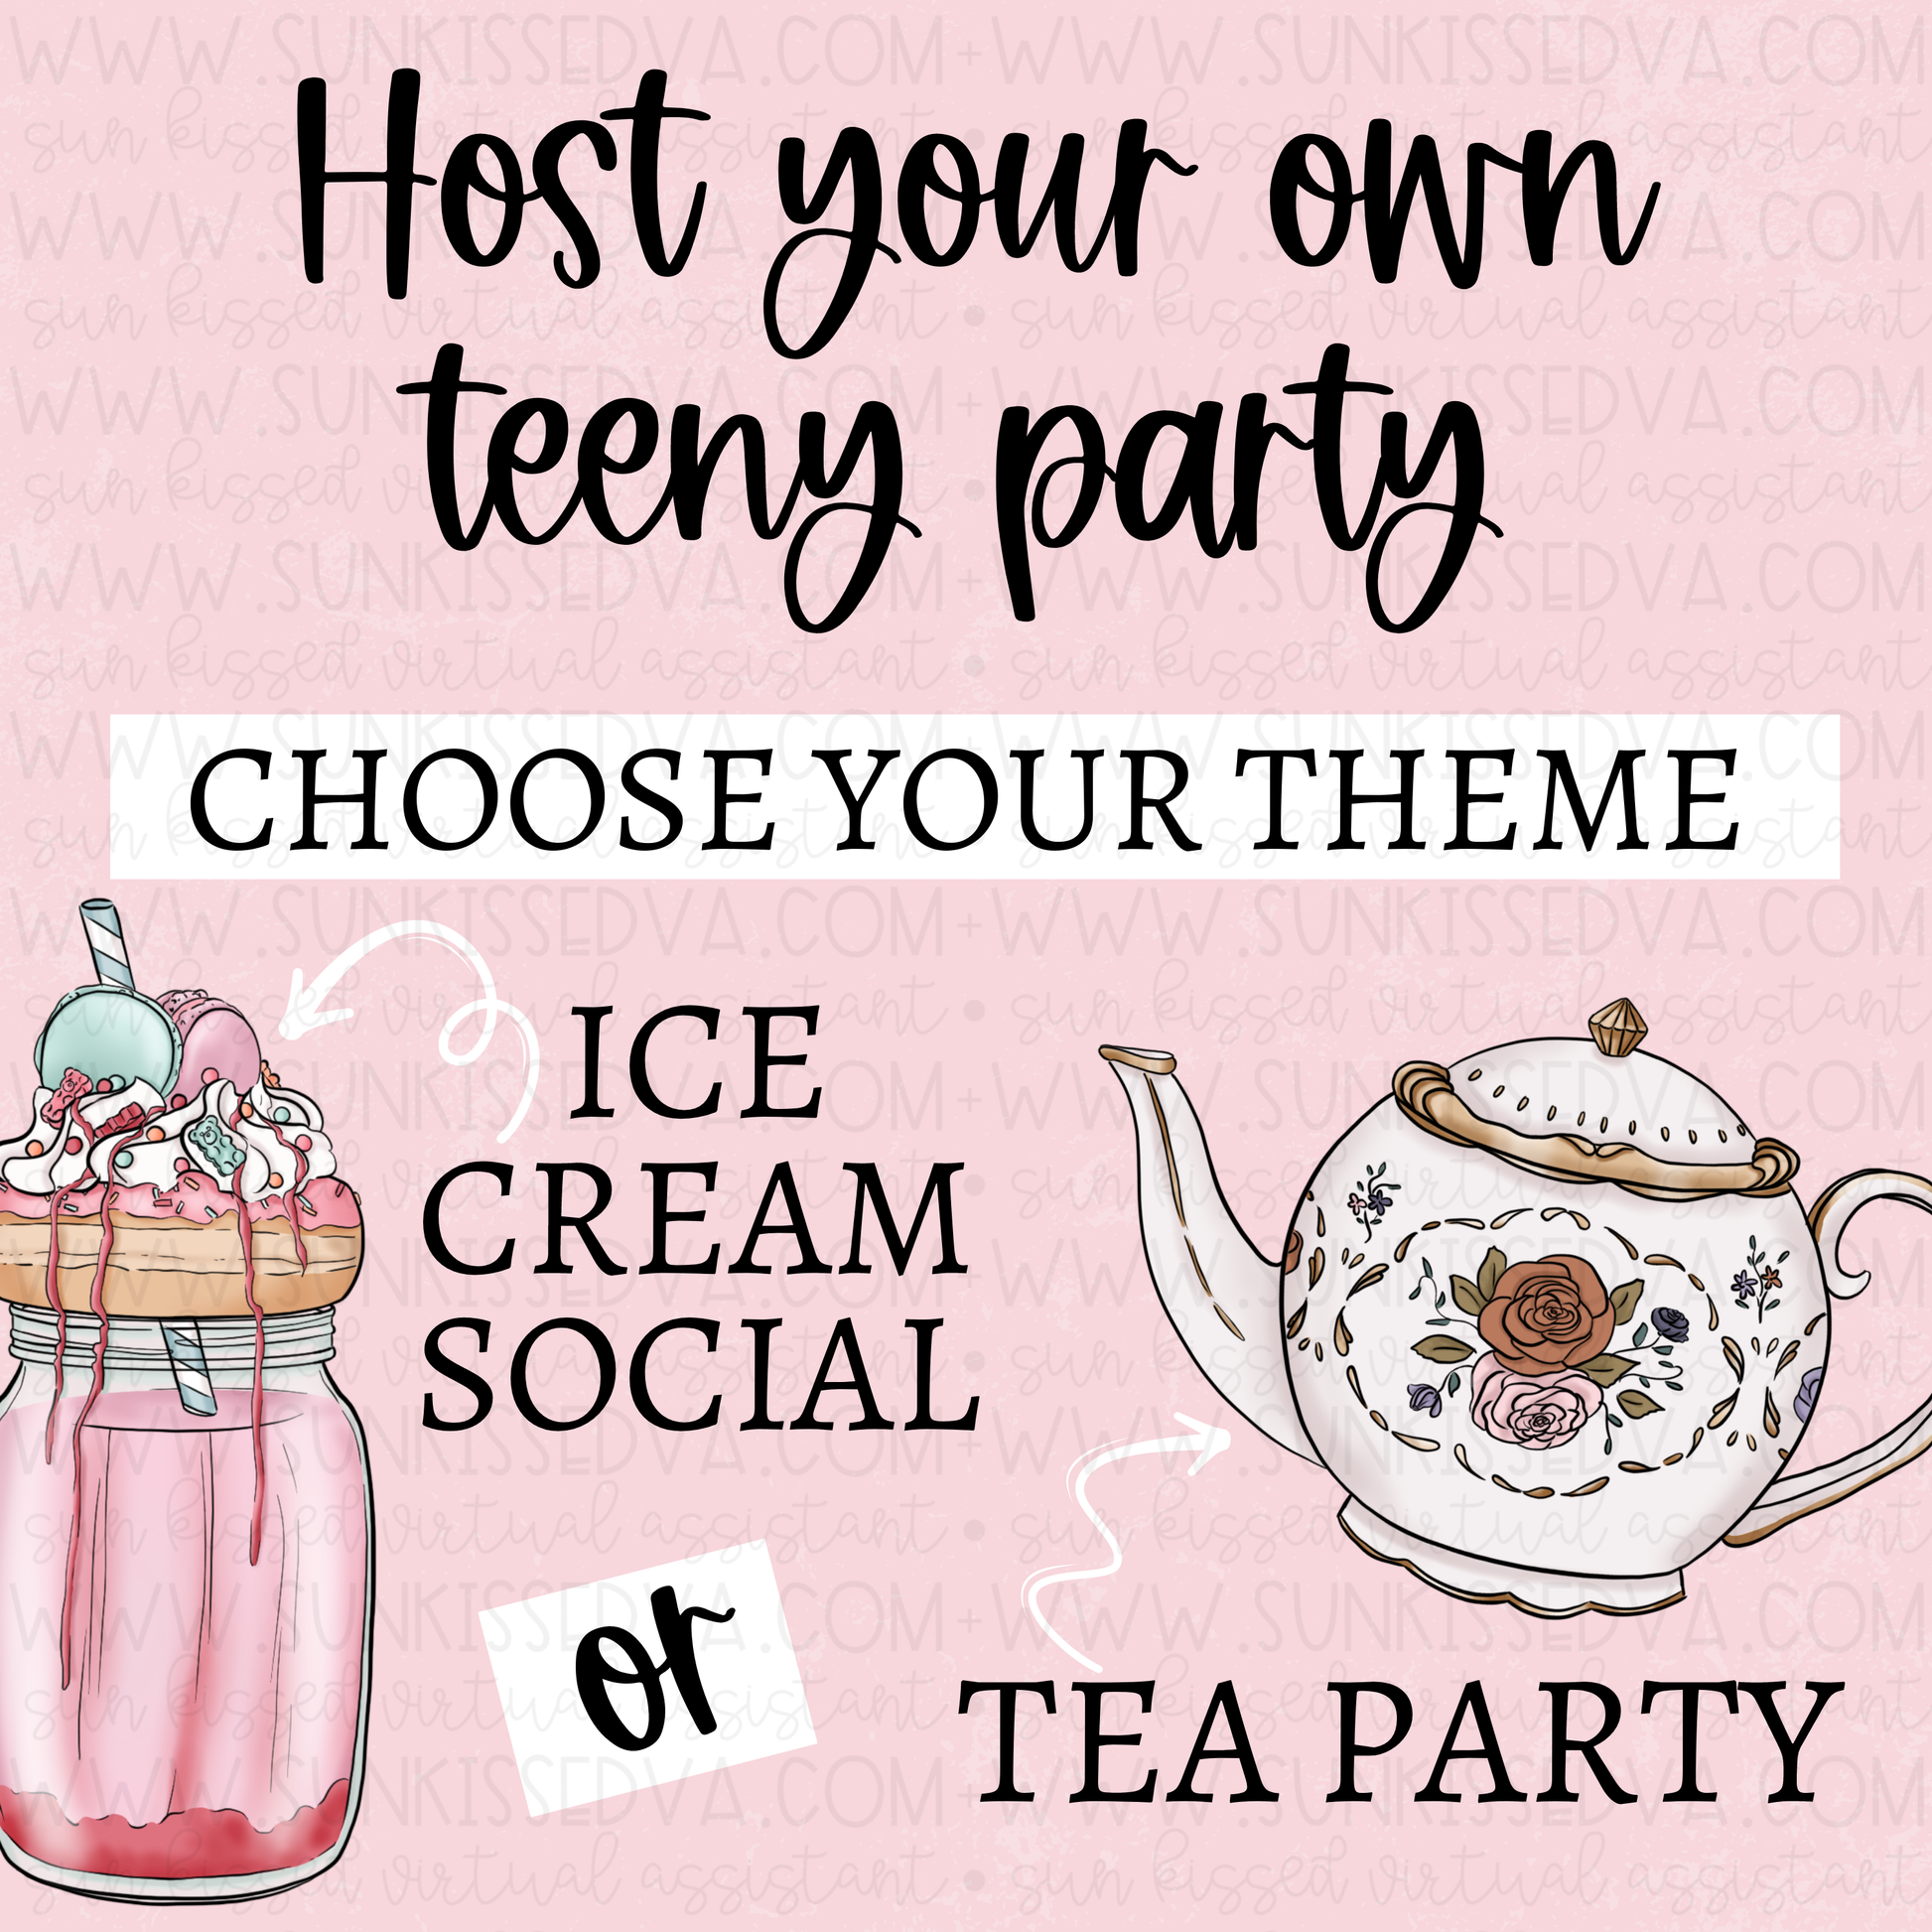 Social Gathering Teeny Party Planner | Sun Kissed Virtual Assistant